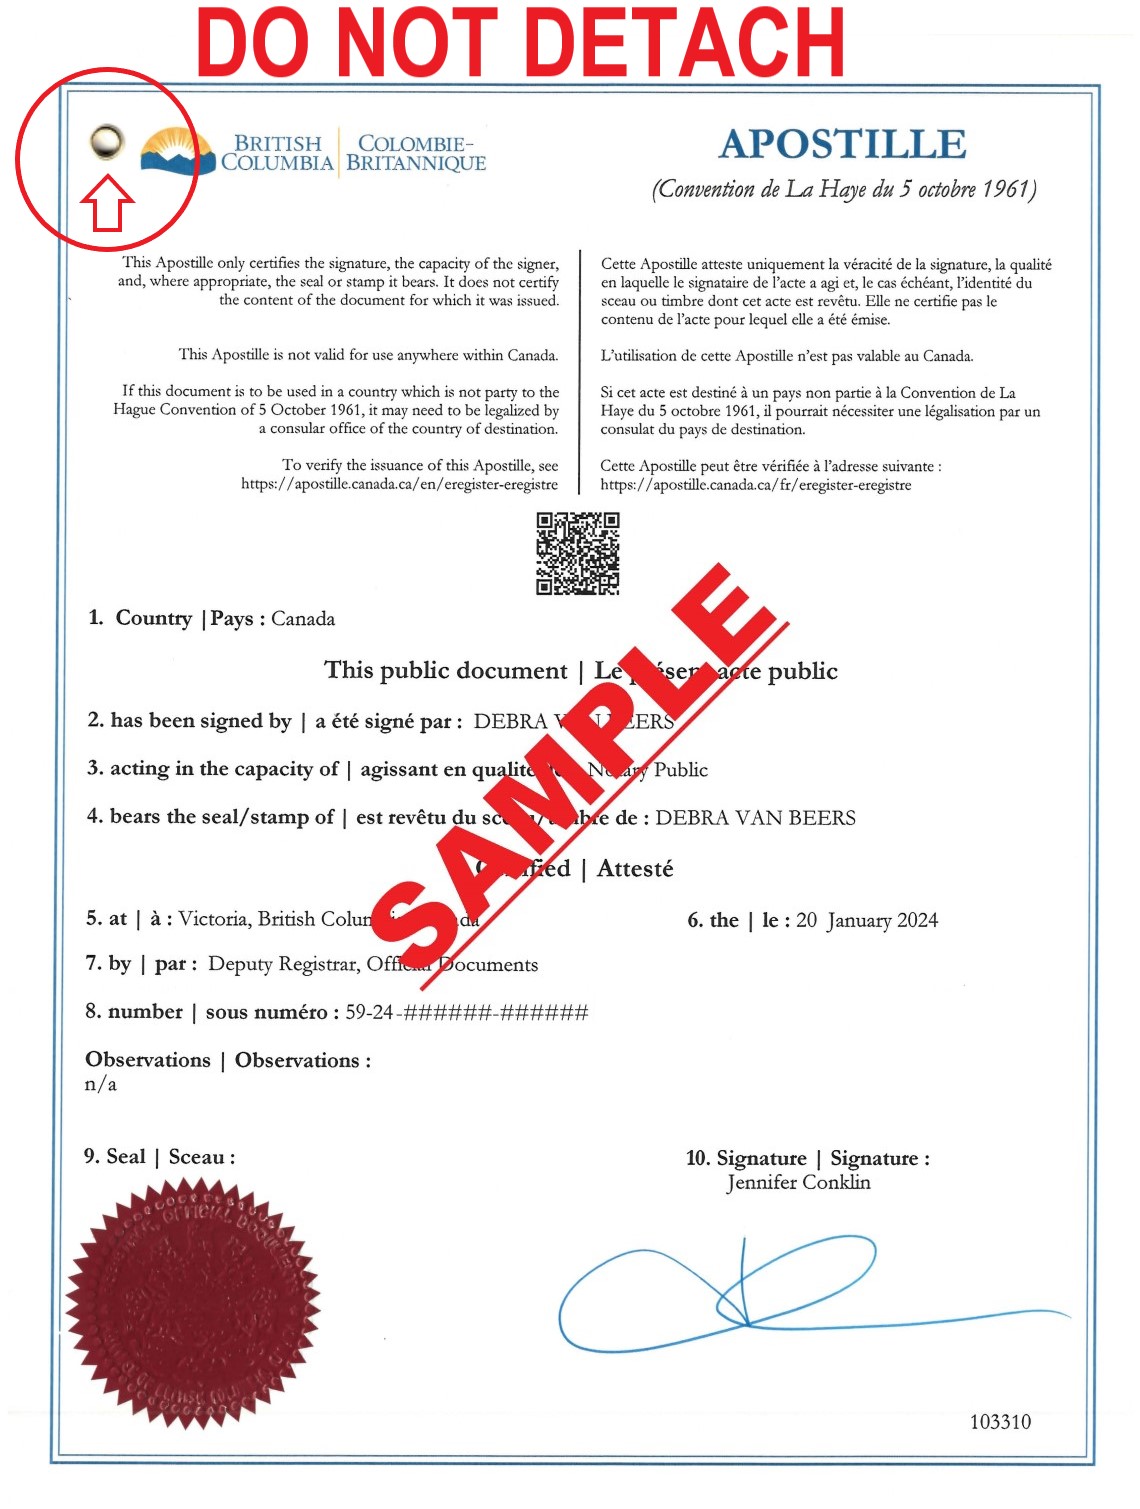 Authentication certificate ("apostille") riveted to document on or after January 11, 2024